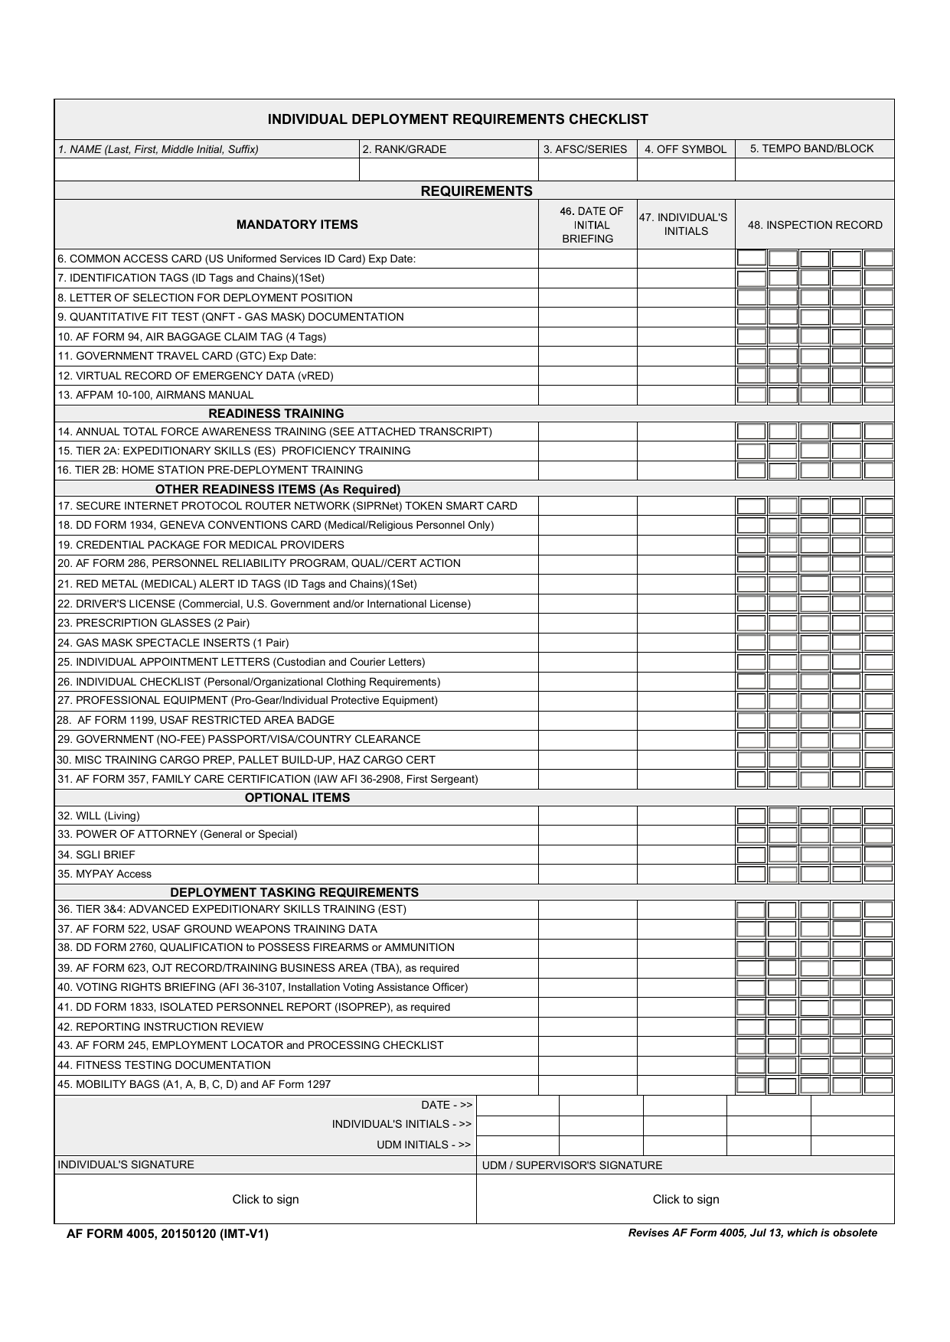 AF Form 4005 Individual Deployment Requirements Checklist, Page 1